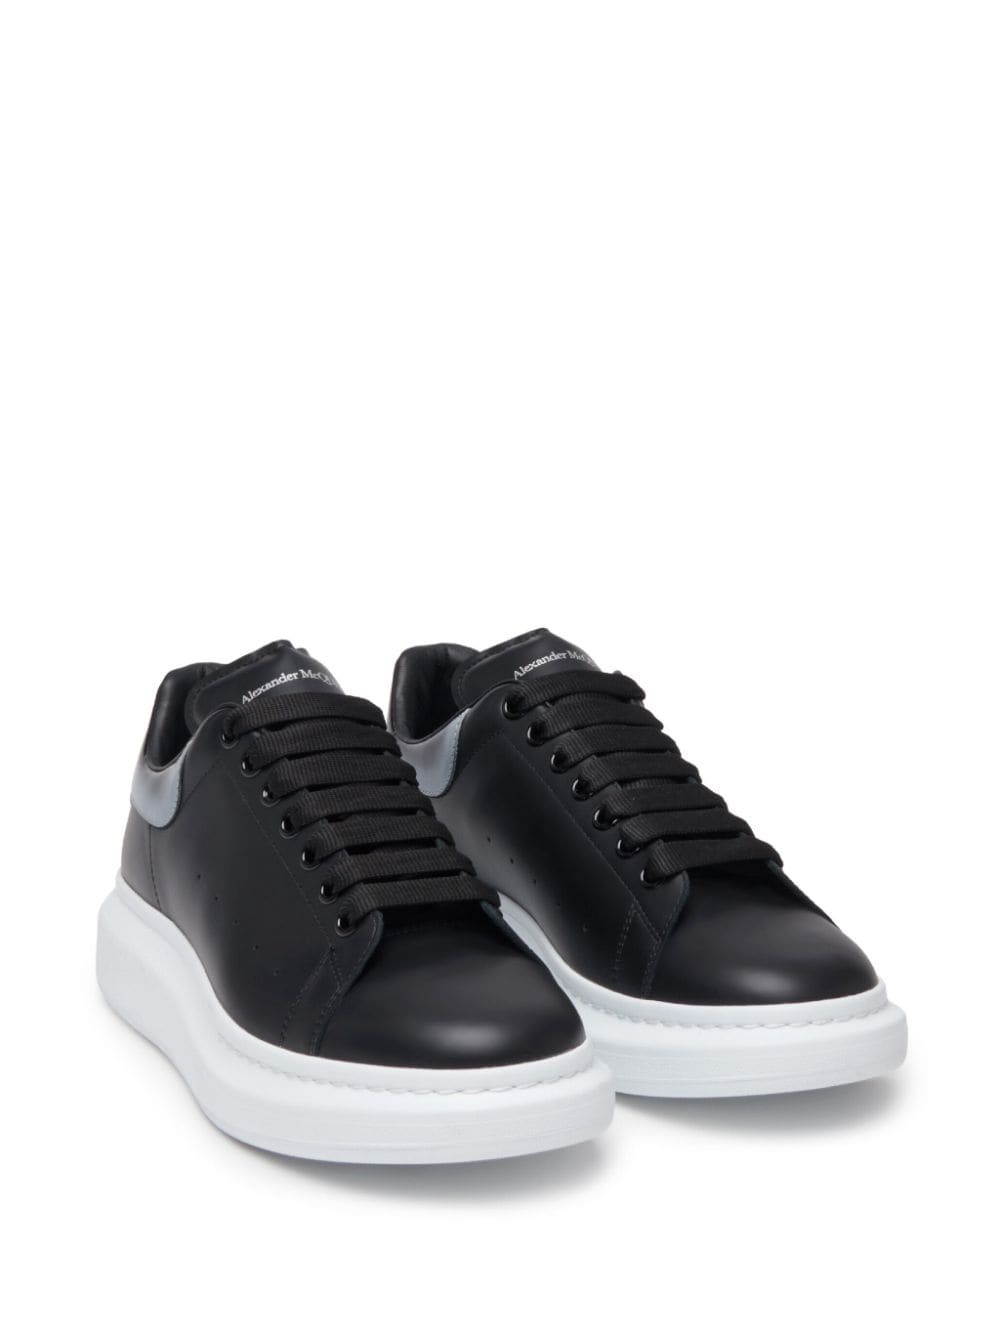 Shop Alexander Mcqueen Men's Oversized Black Leather Sneakers With Chunky Rubber Sole